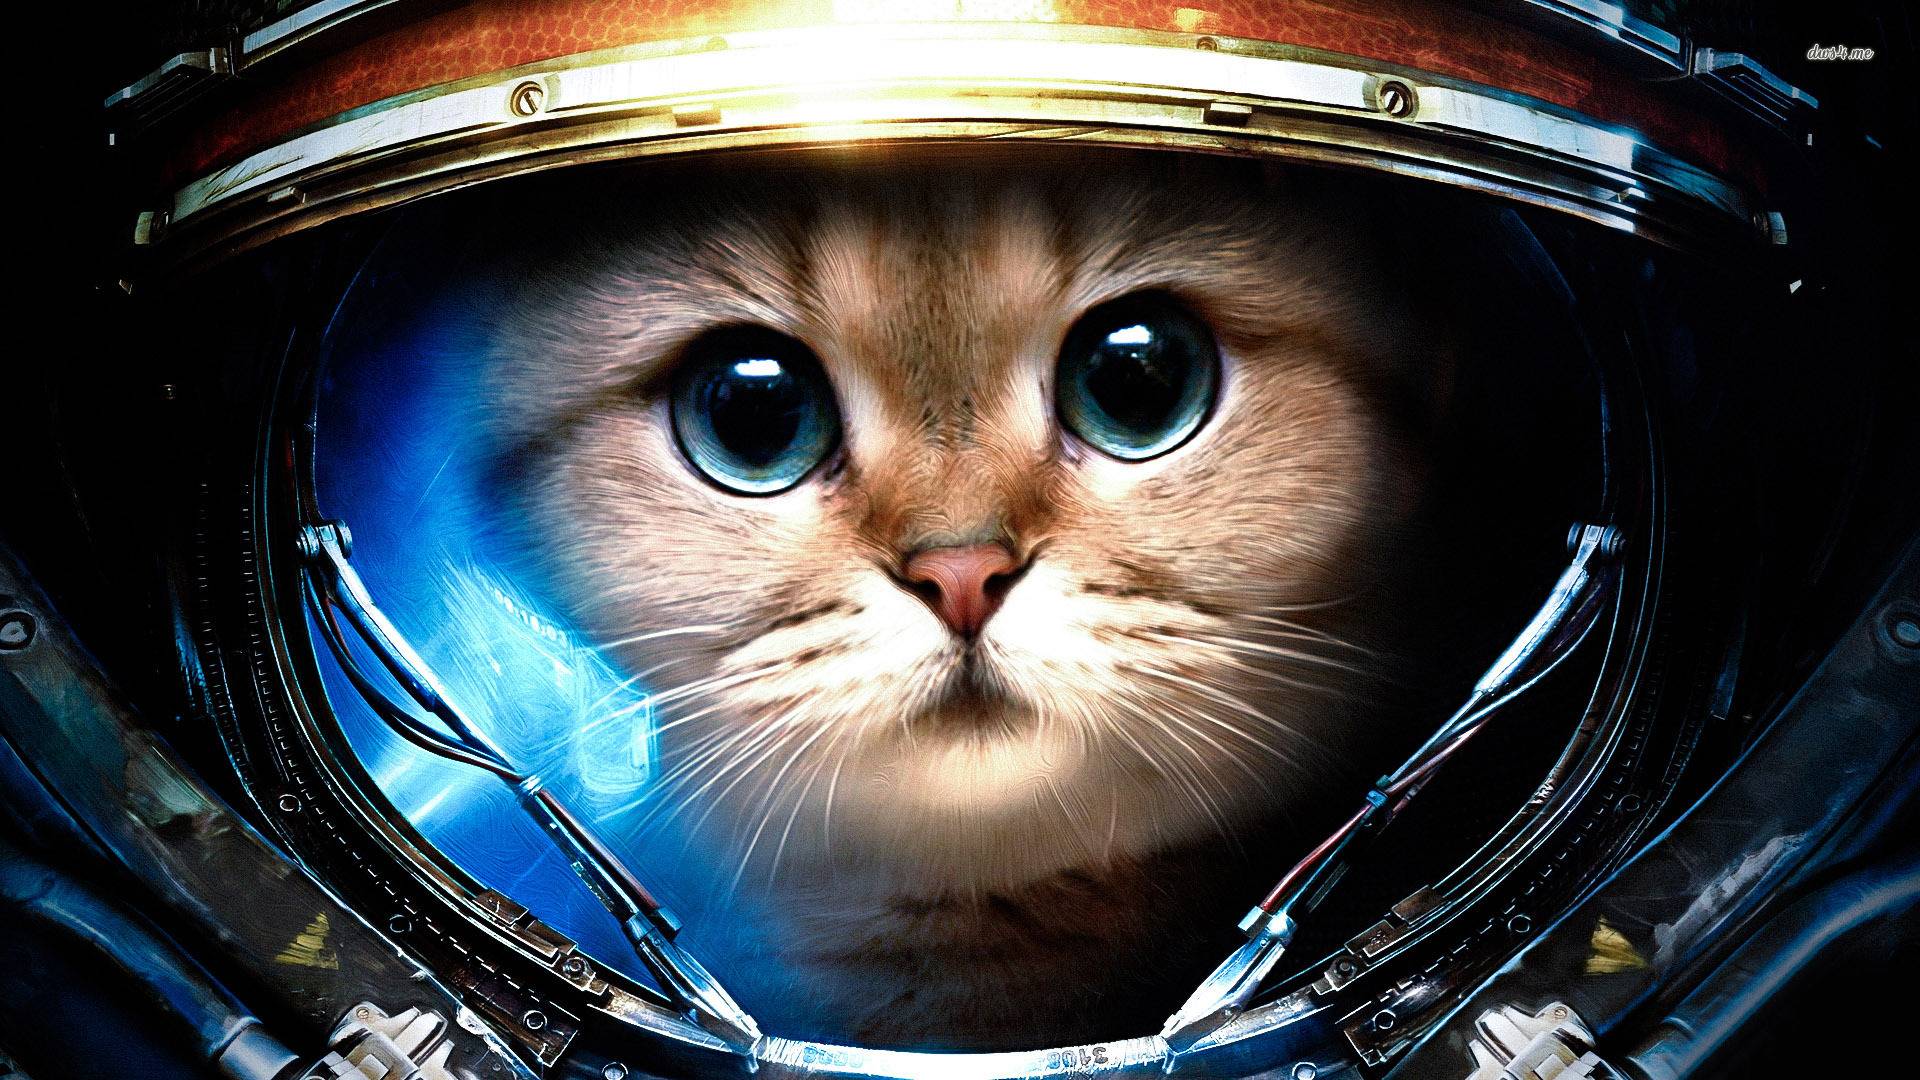 SPACE CAT He is going to be the first cat to walk on the moon XD